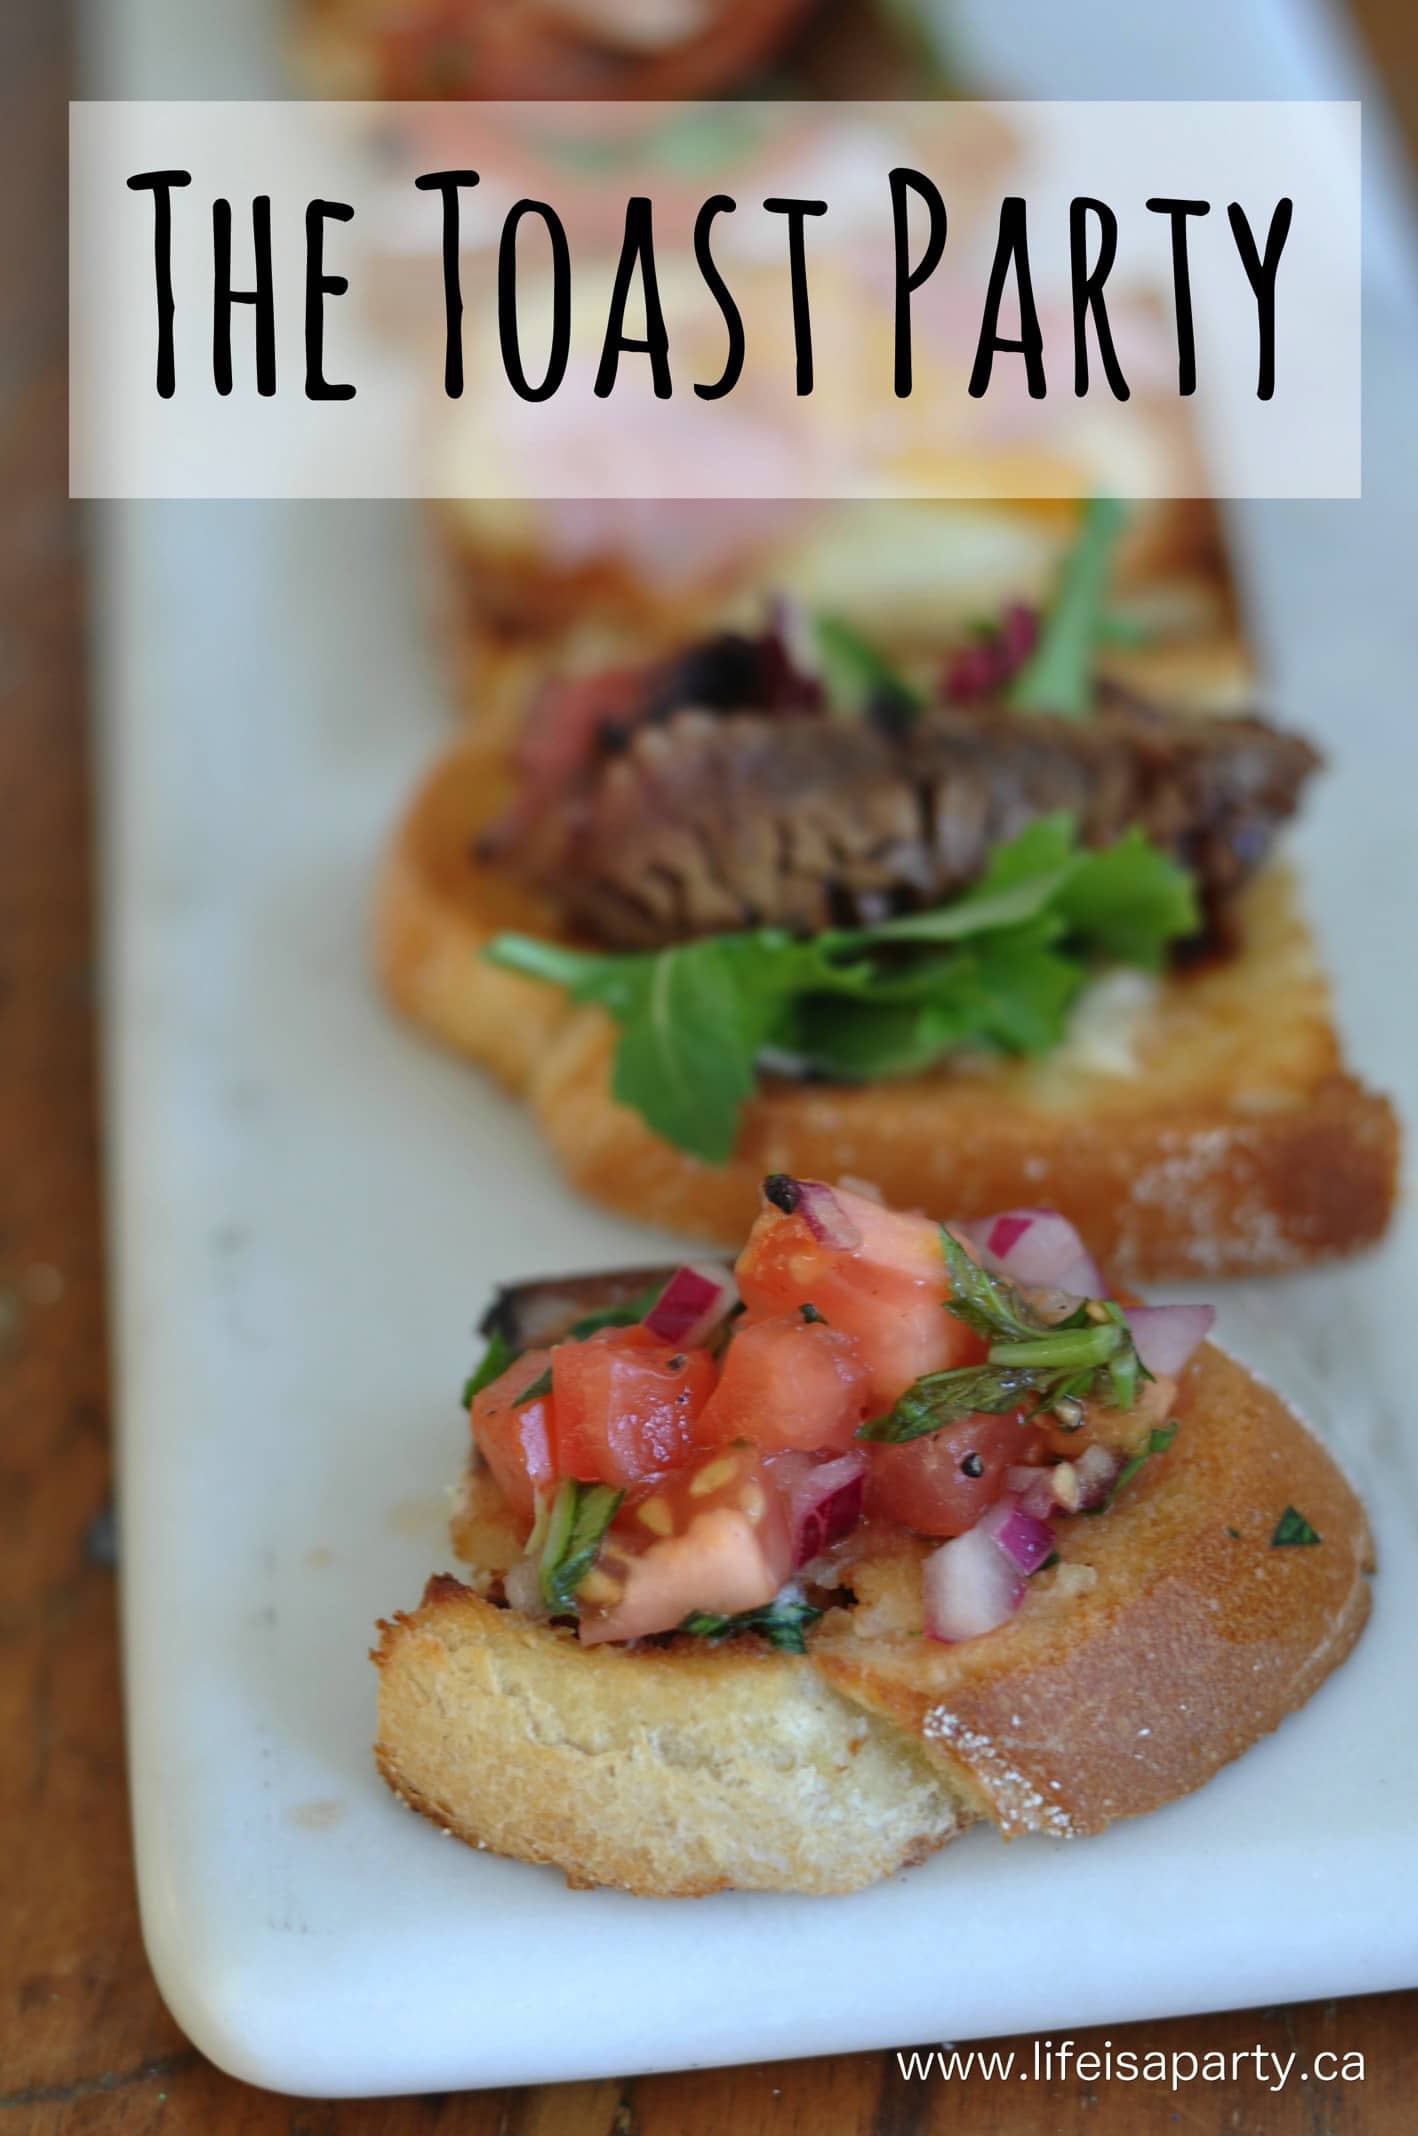 Toast Party -Set up a Toast/Bruschetta/Crostini Bar for guest with a whole menu of different gourmet toast and toppings. Just like fondue party, but better!